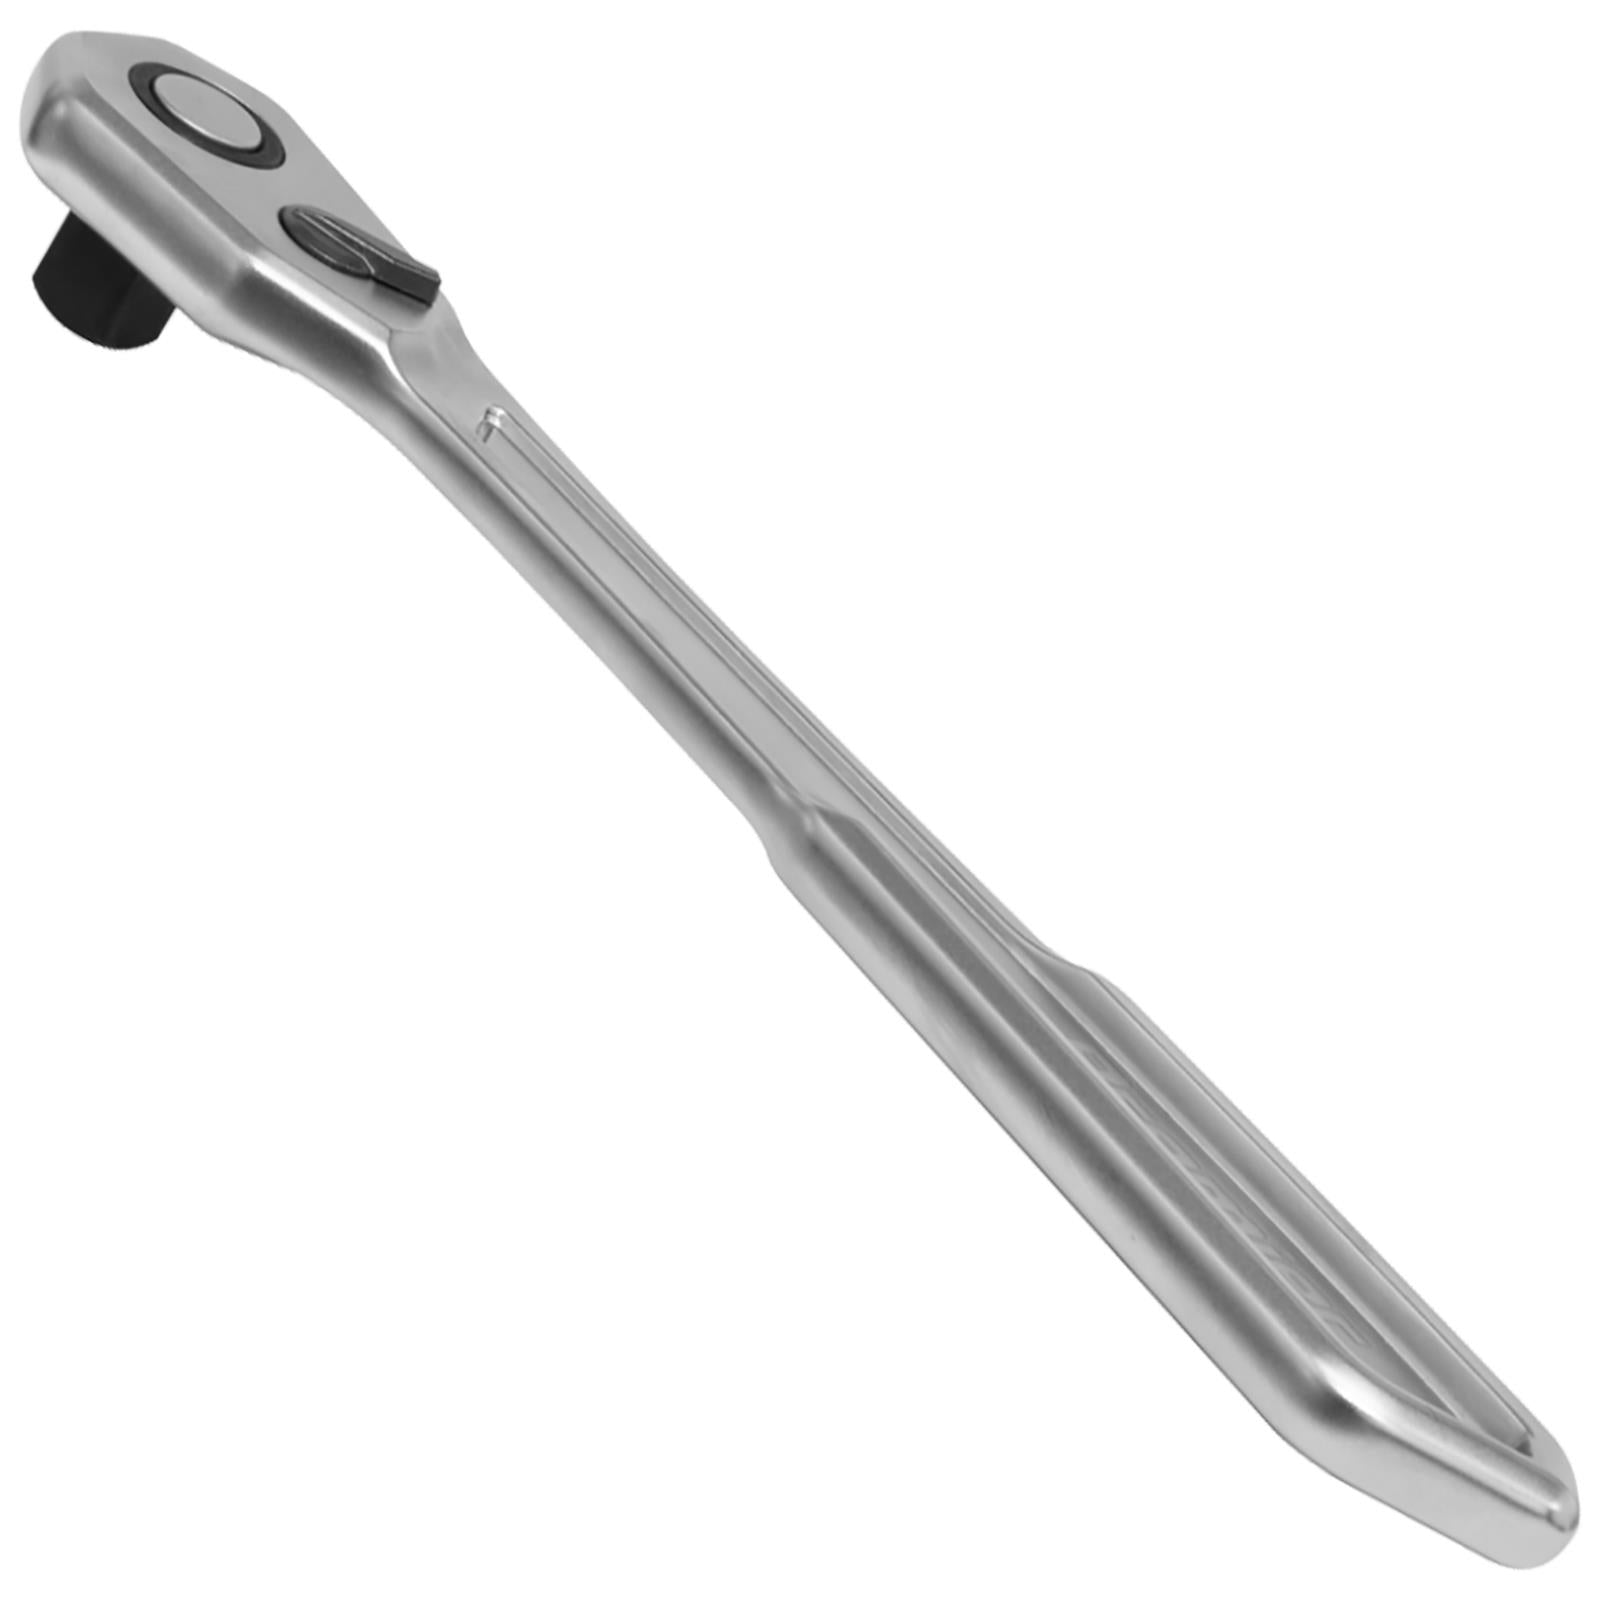 Sealey Premier Ratchet Wrench Low Profile 1/2" Drive Flip Reverse 90 Tooth